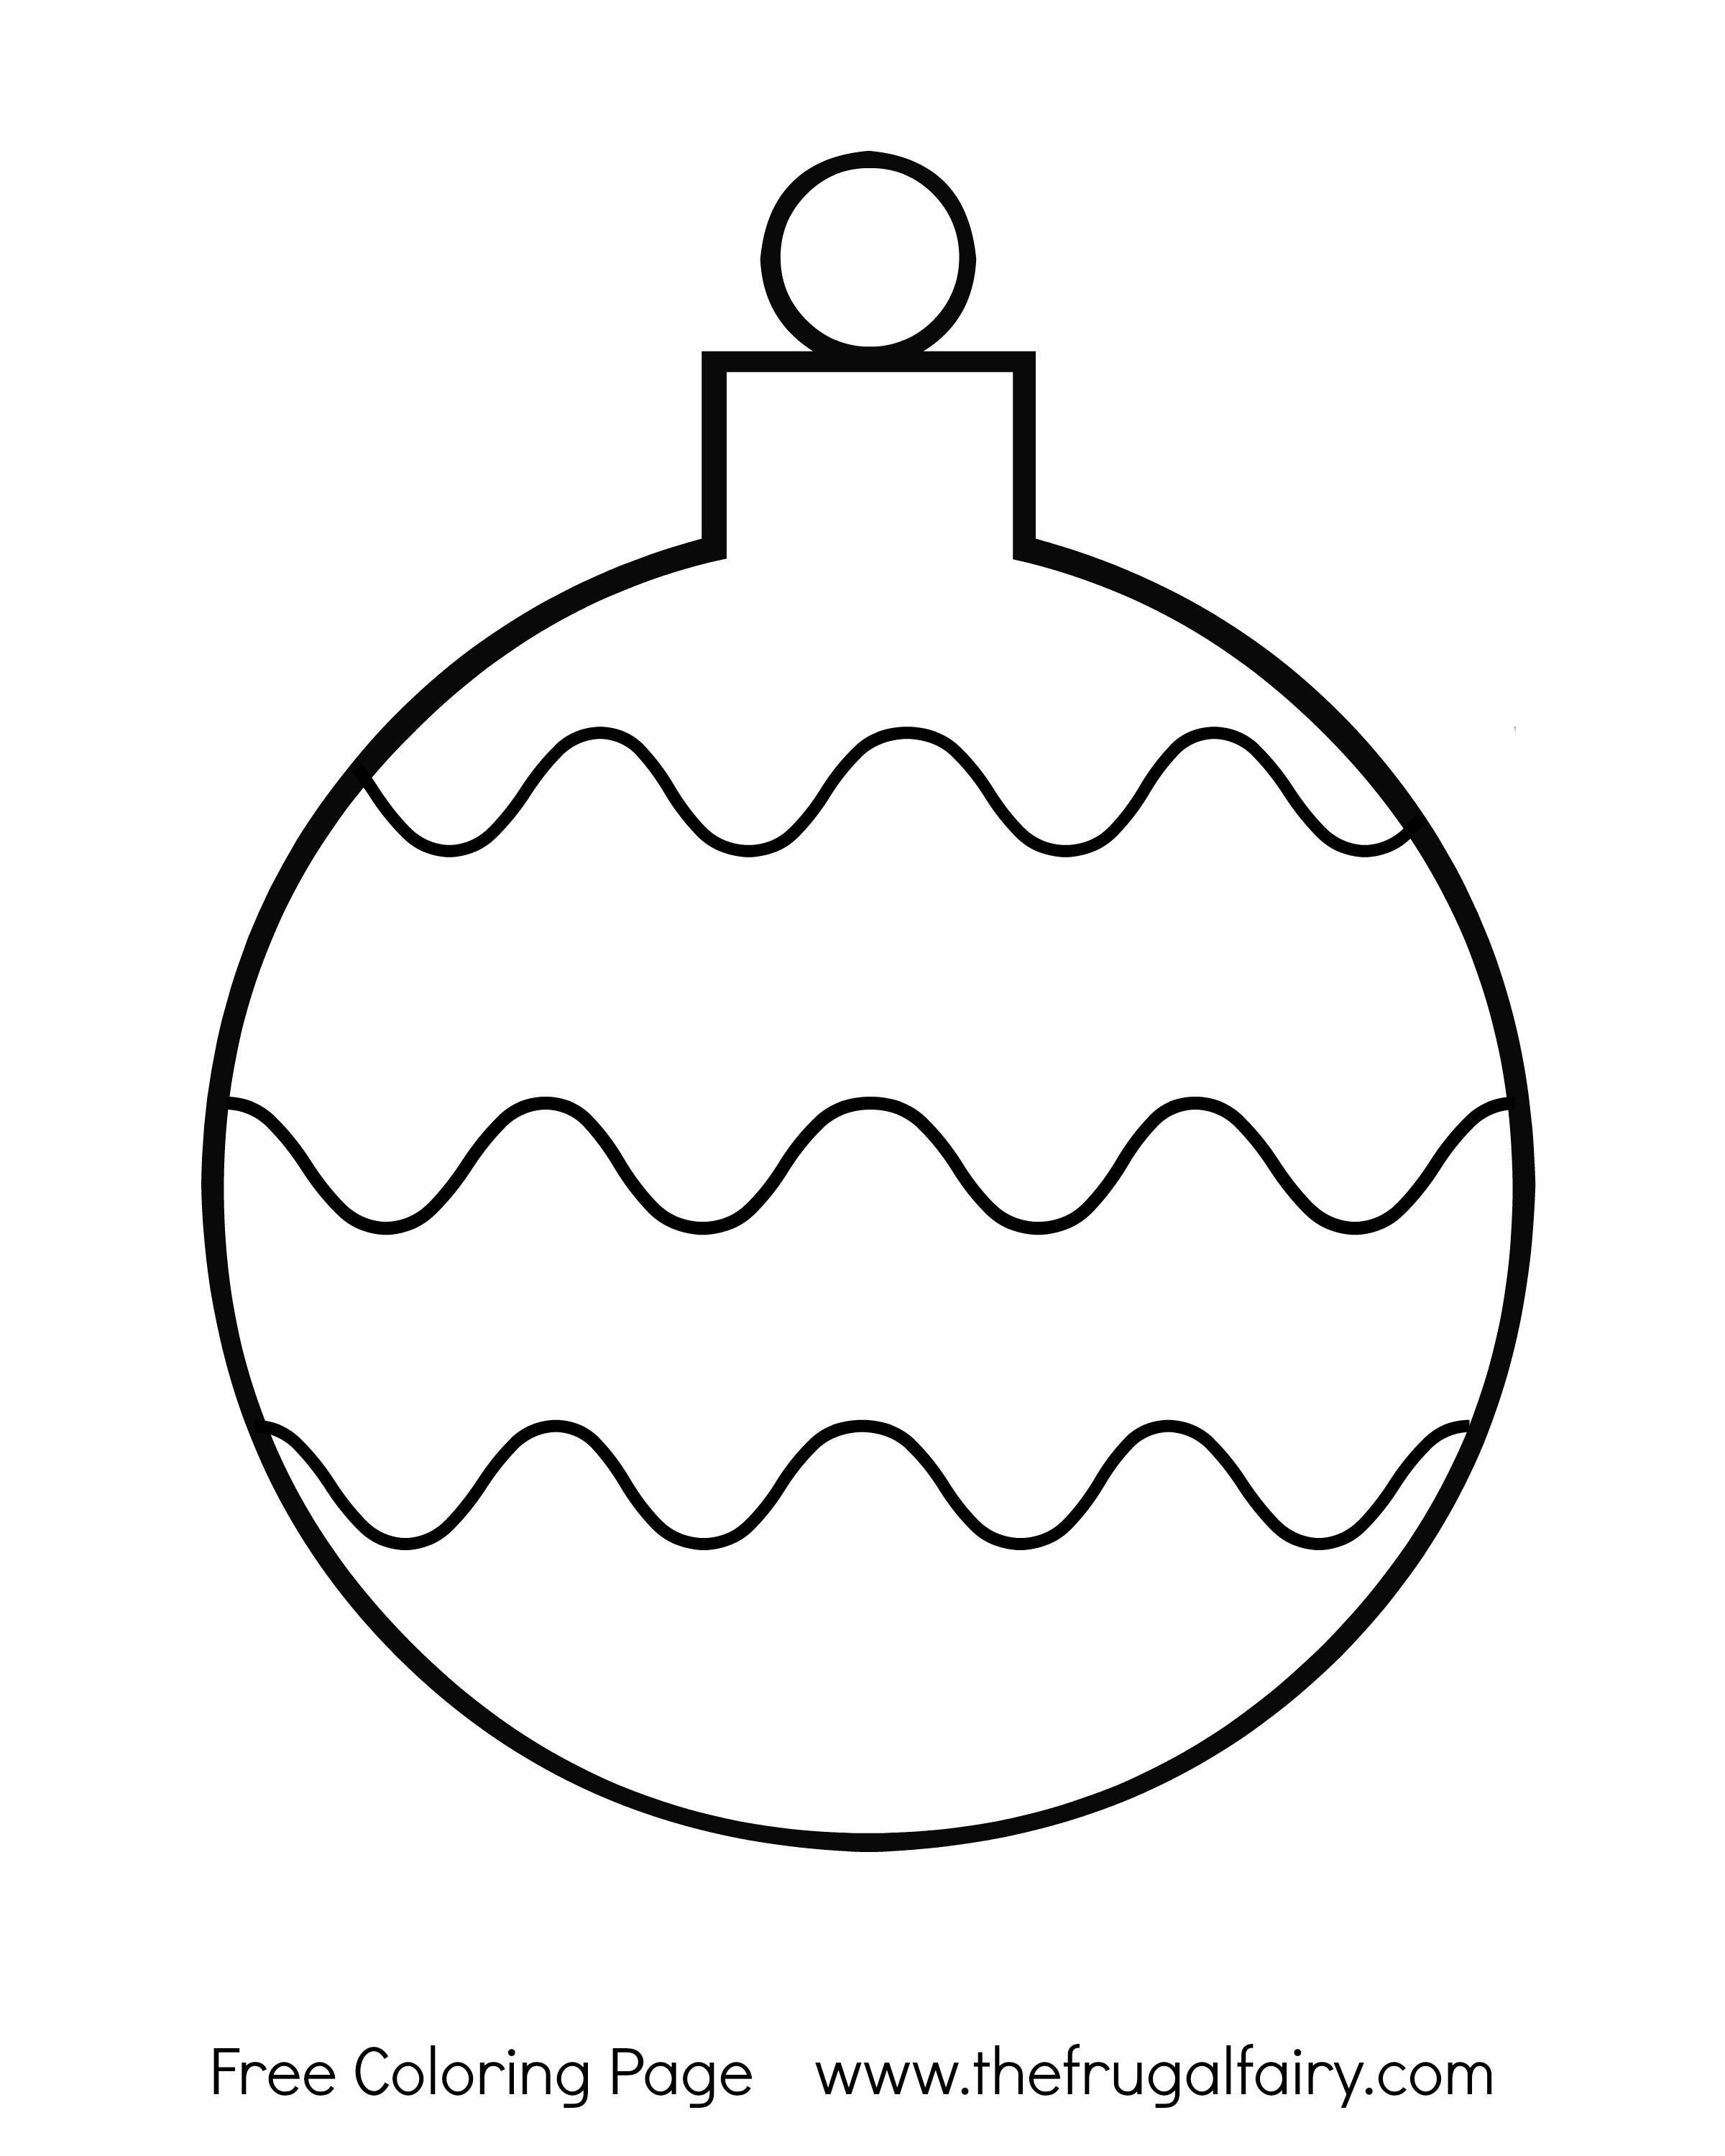 Printable Ornament Coloring Pages at GetColorings.com | Free printable